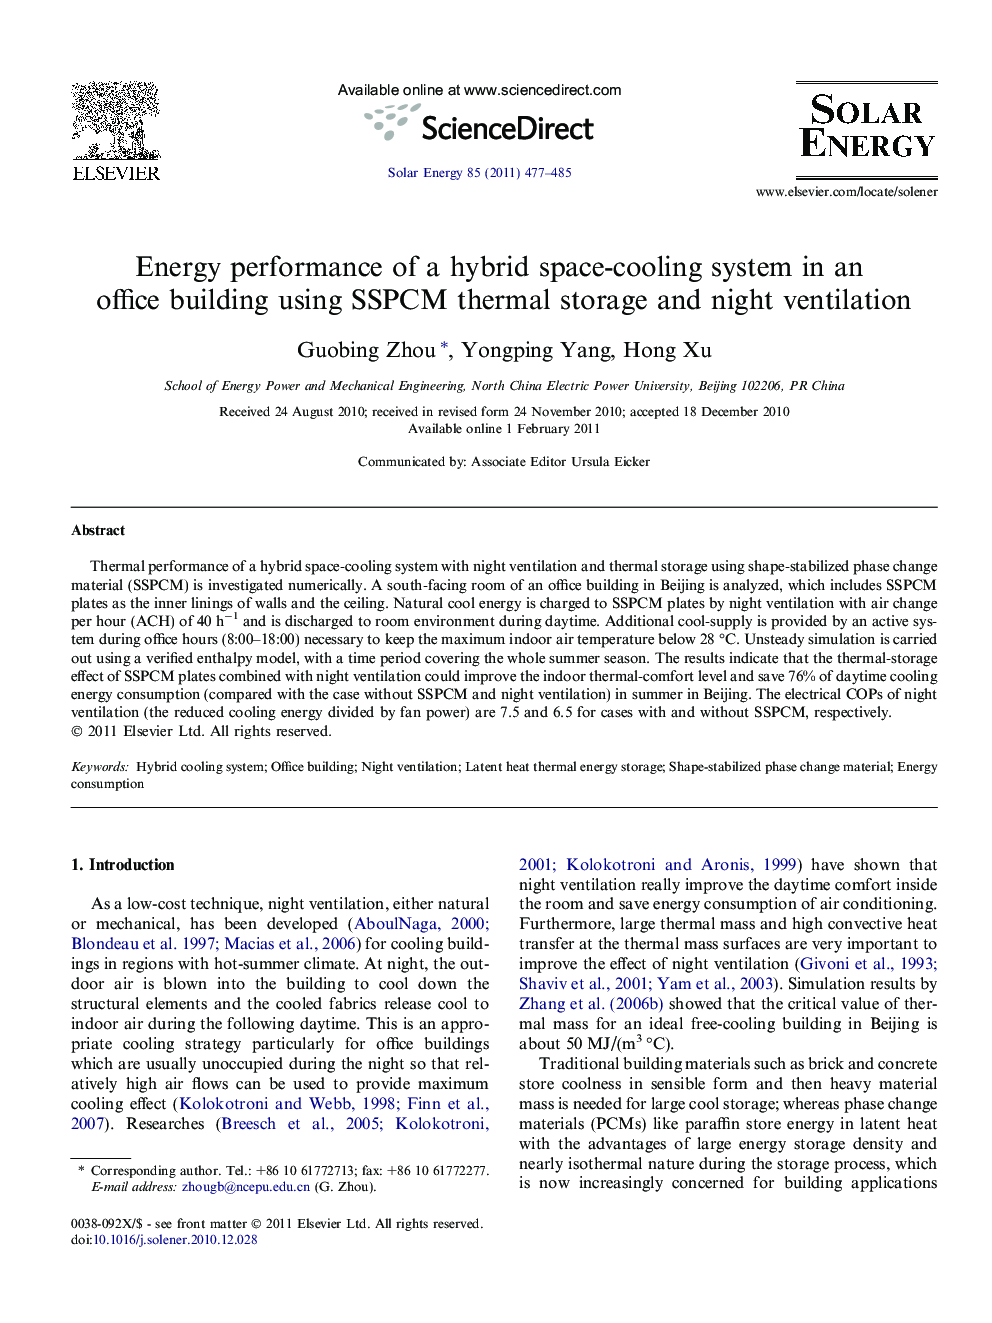 Energy performance of a hybrid space-cooling system in an office building using SSPCM thermal storage and night ventilation